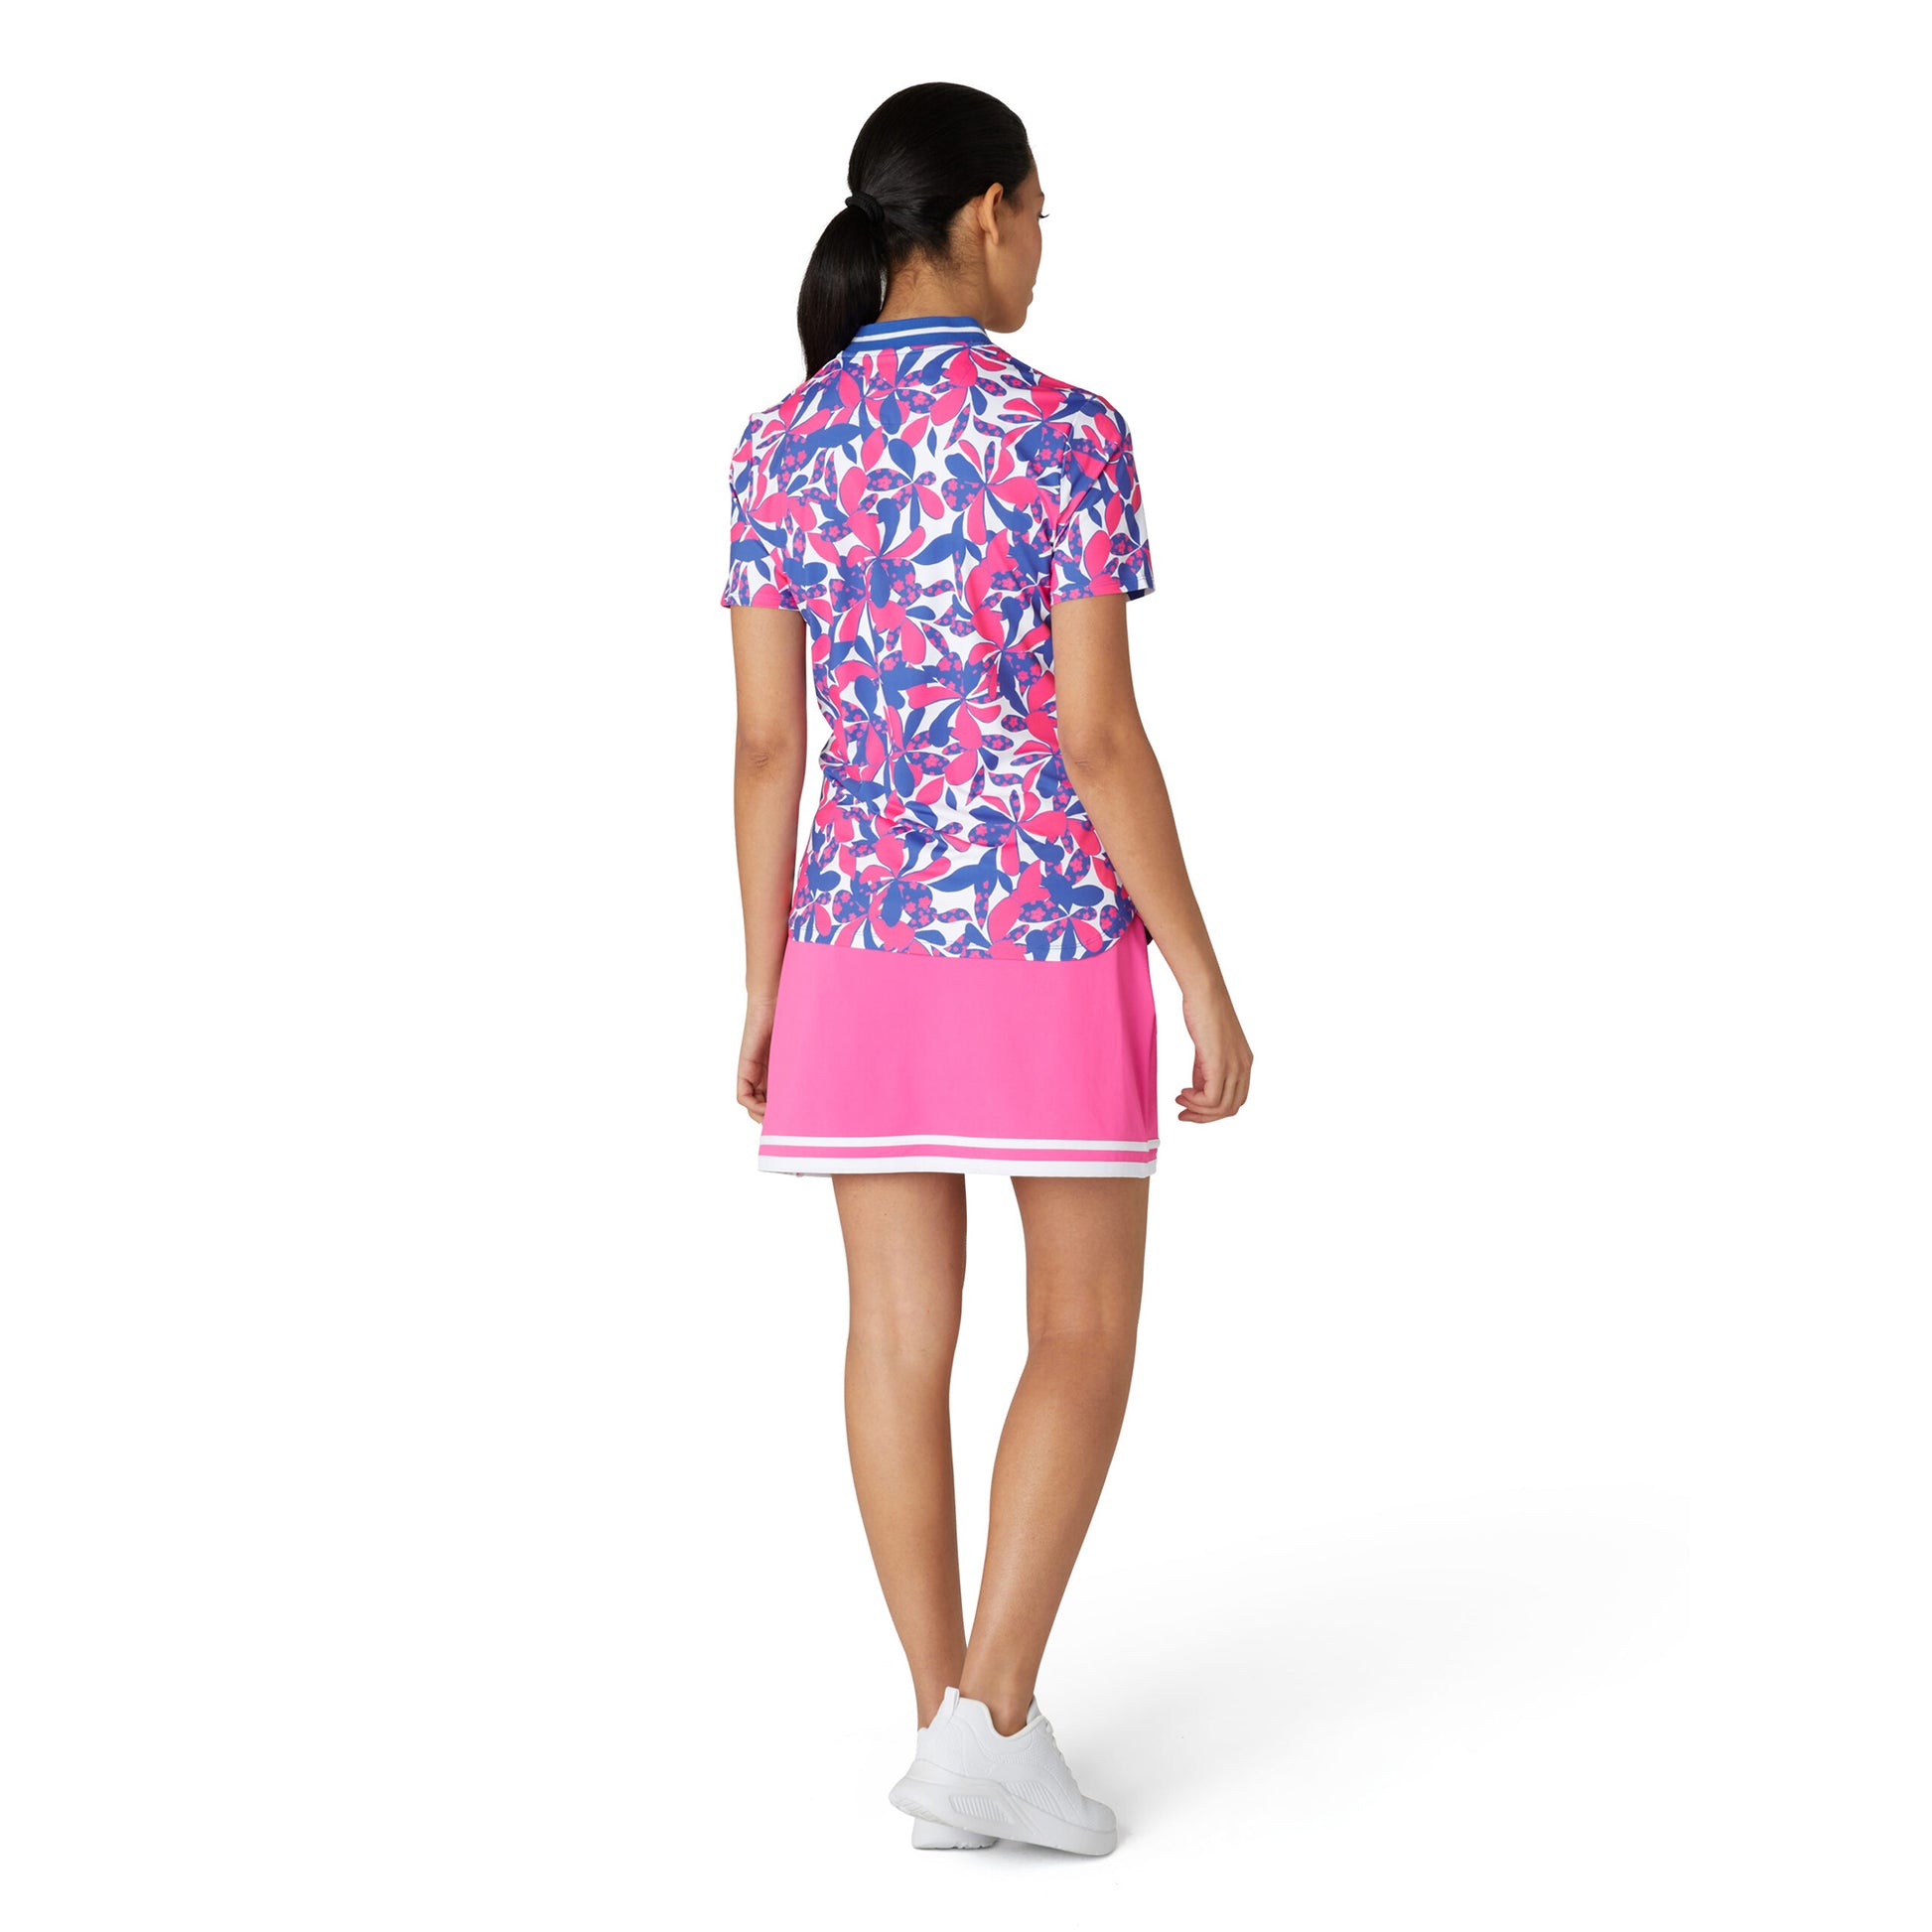 Original Penguin Ladies Short Sleeve Floral Print Polo Shirt in Cheeky Pink